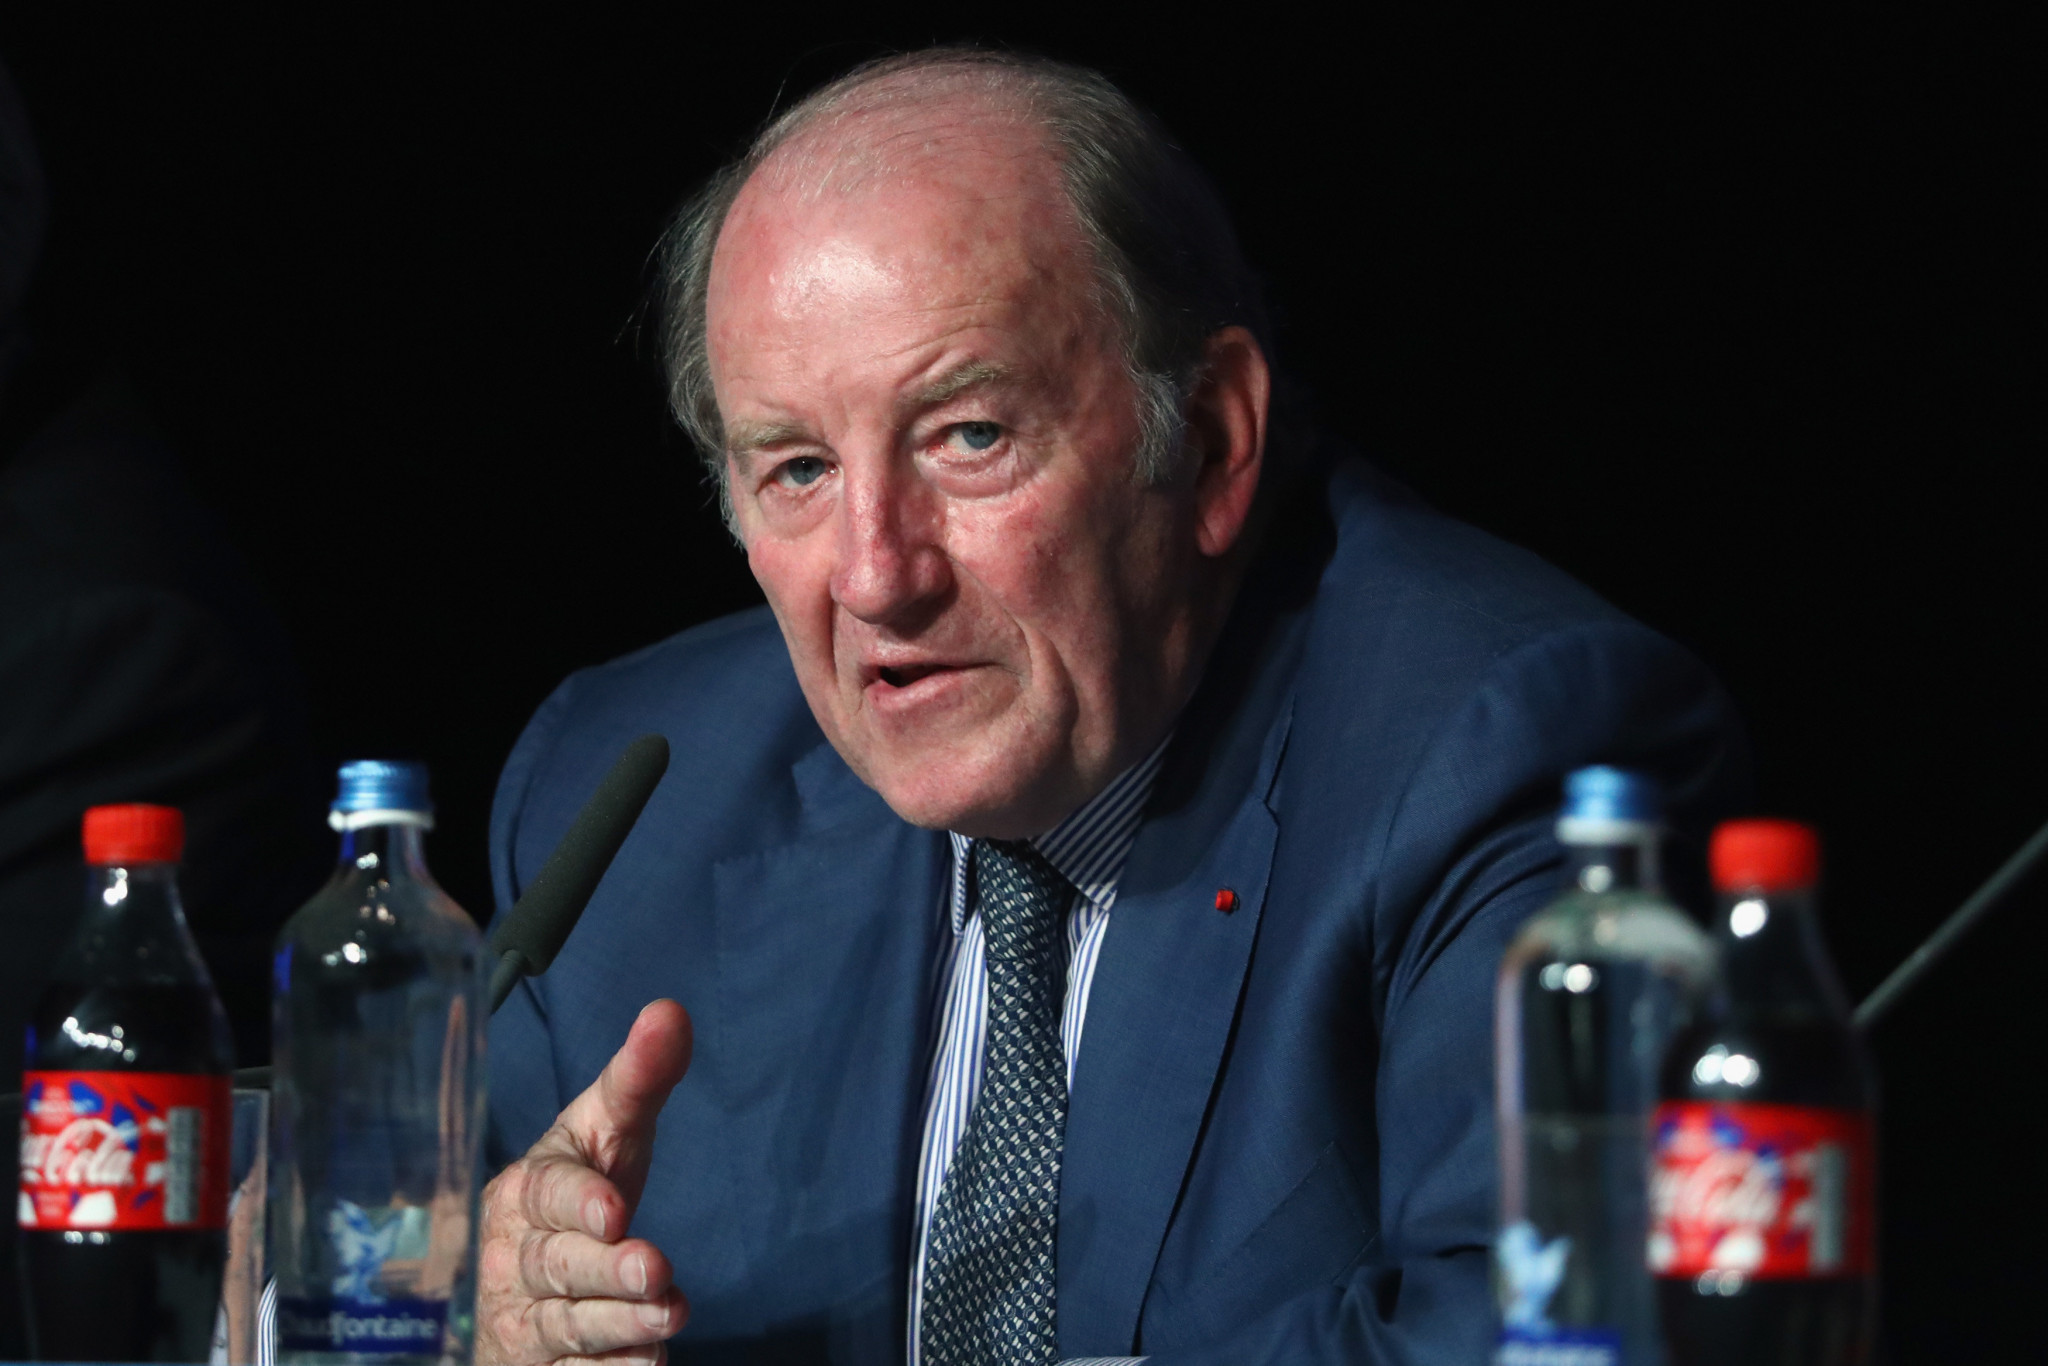 The Paris 2024 Audit Committee is chaired by Jacques Lambert, who led the Steering Committee for UEFA Euro 2016 ©Getty Images